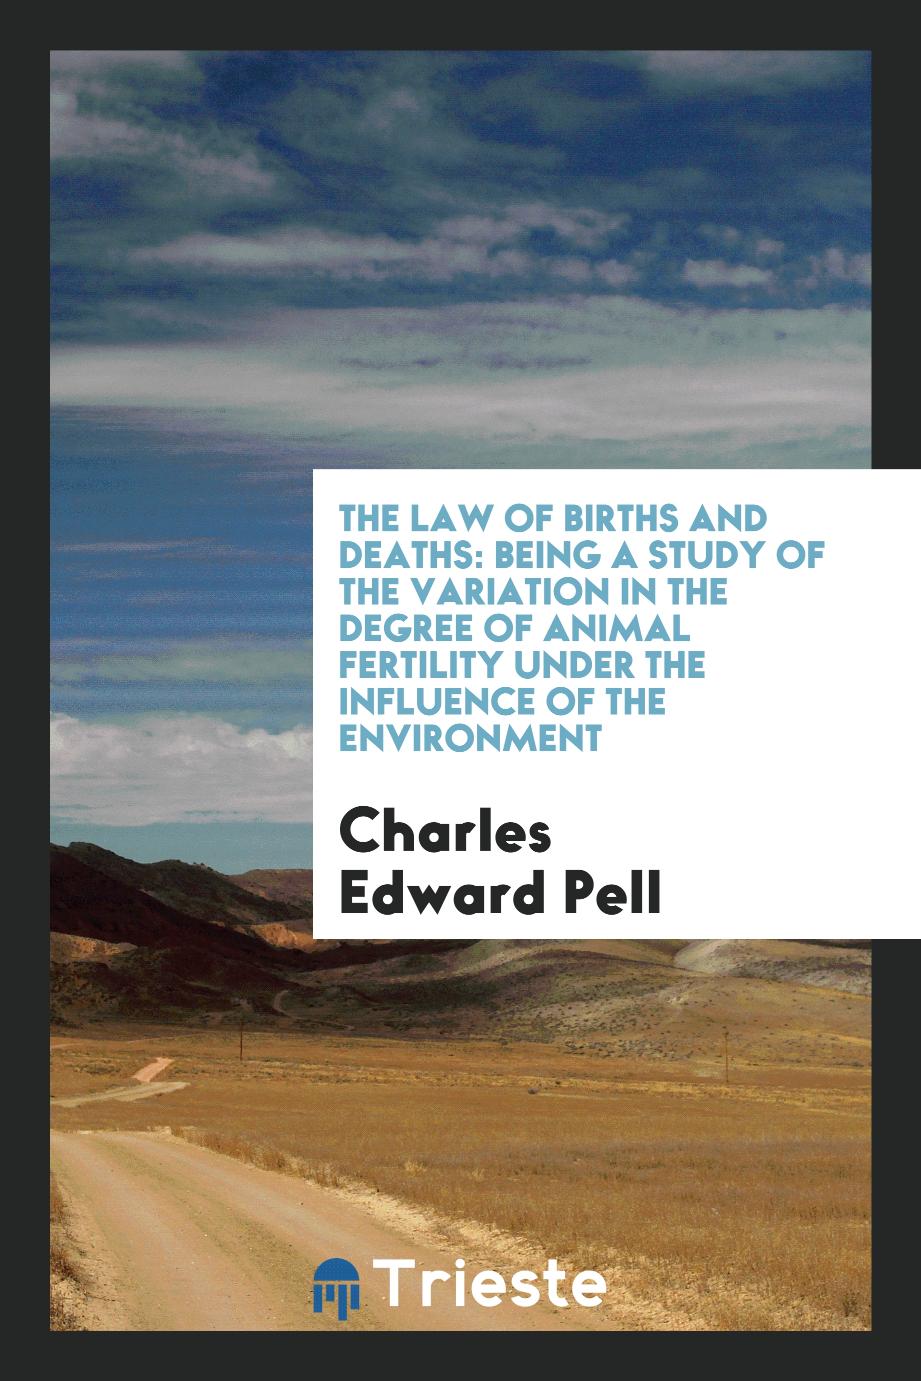 The Law of Births and Deaths: Being a Study of the Variation in the Degree of Animal Fertility Under the Influence of the Environment